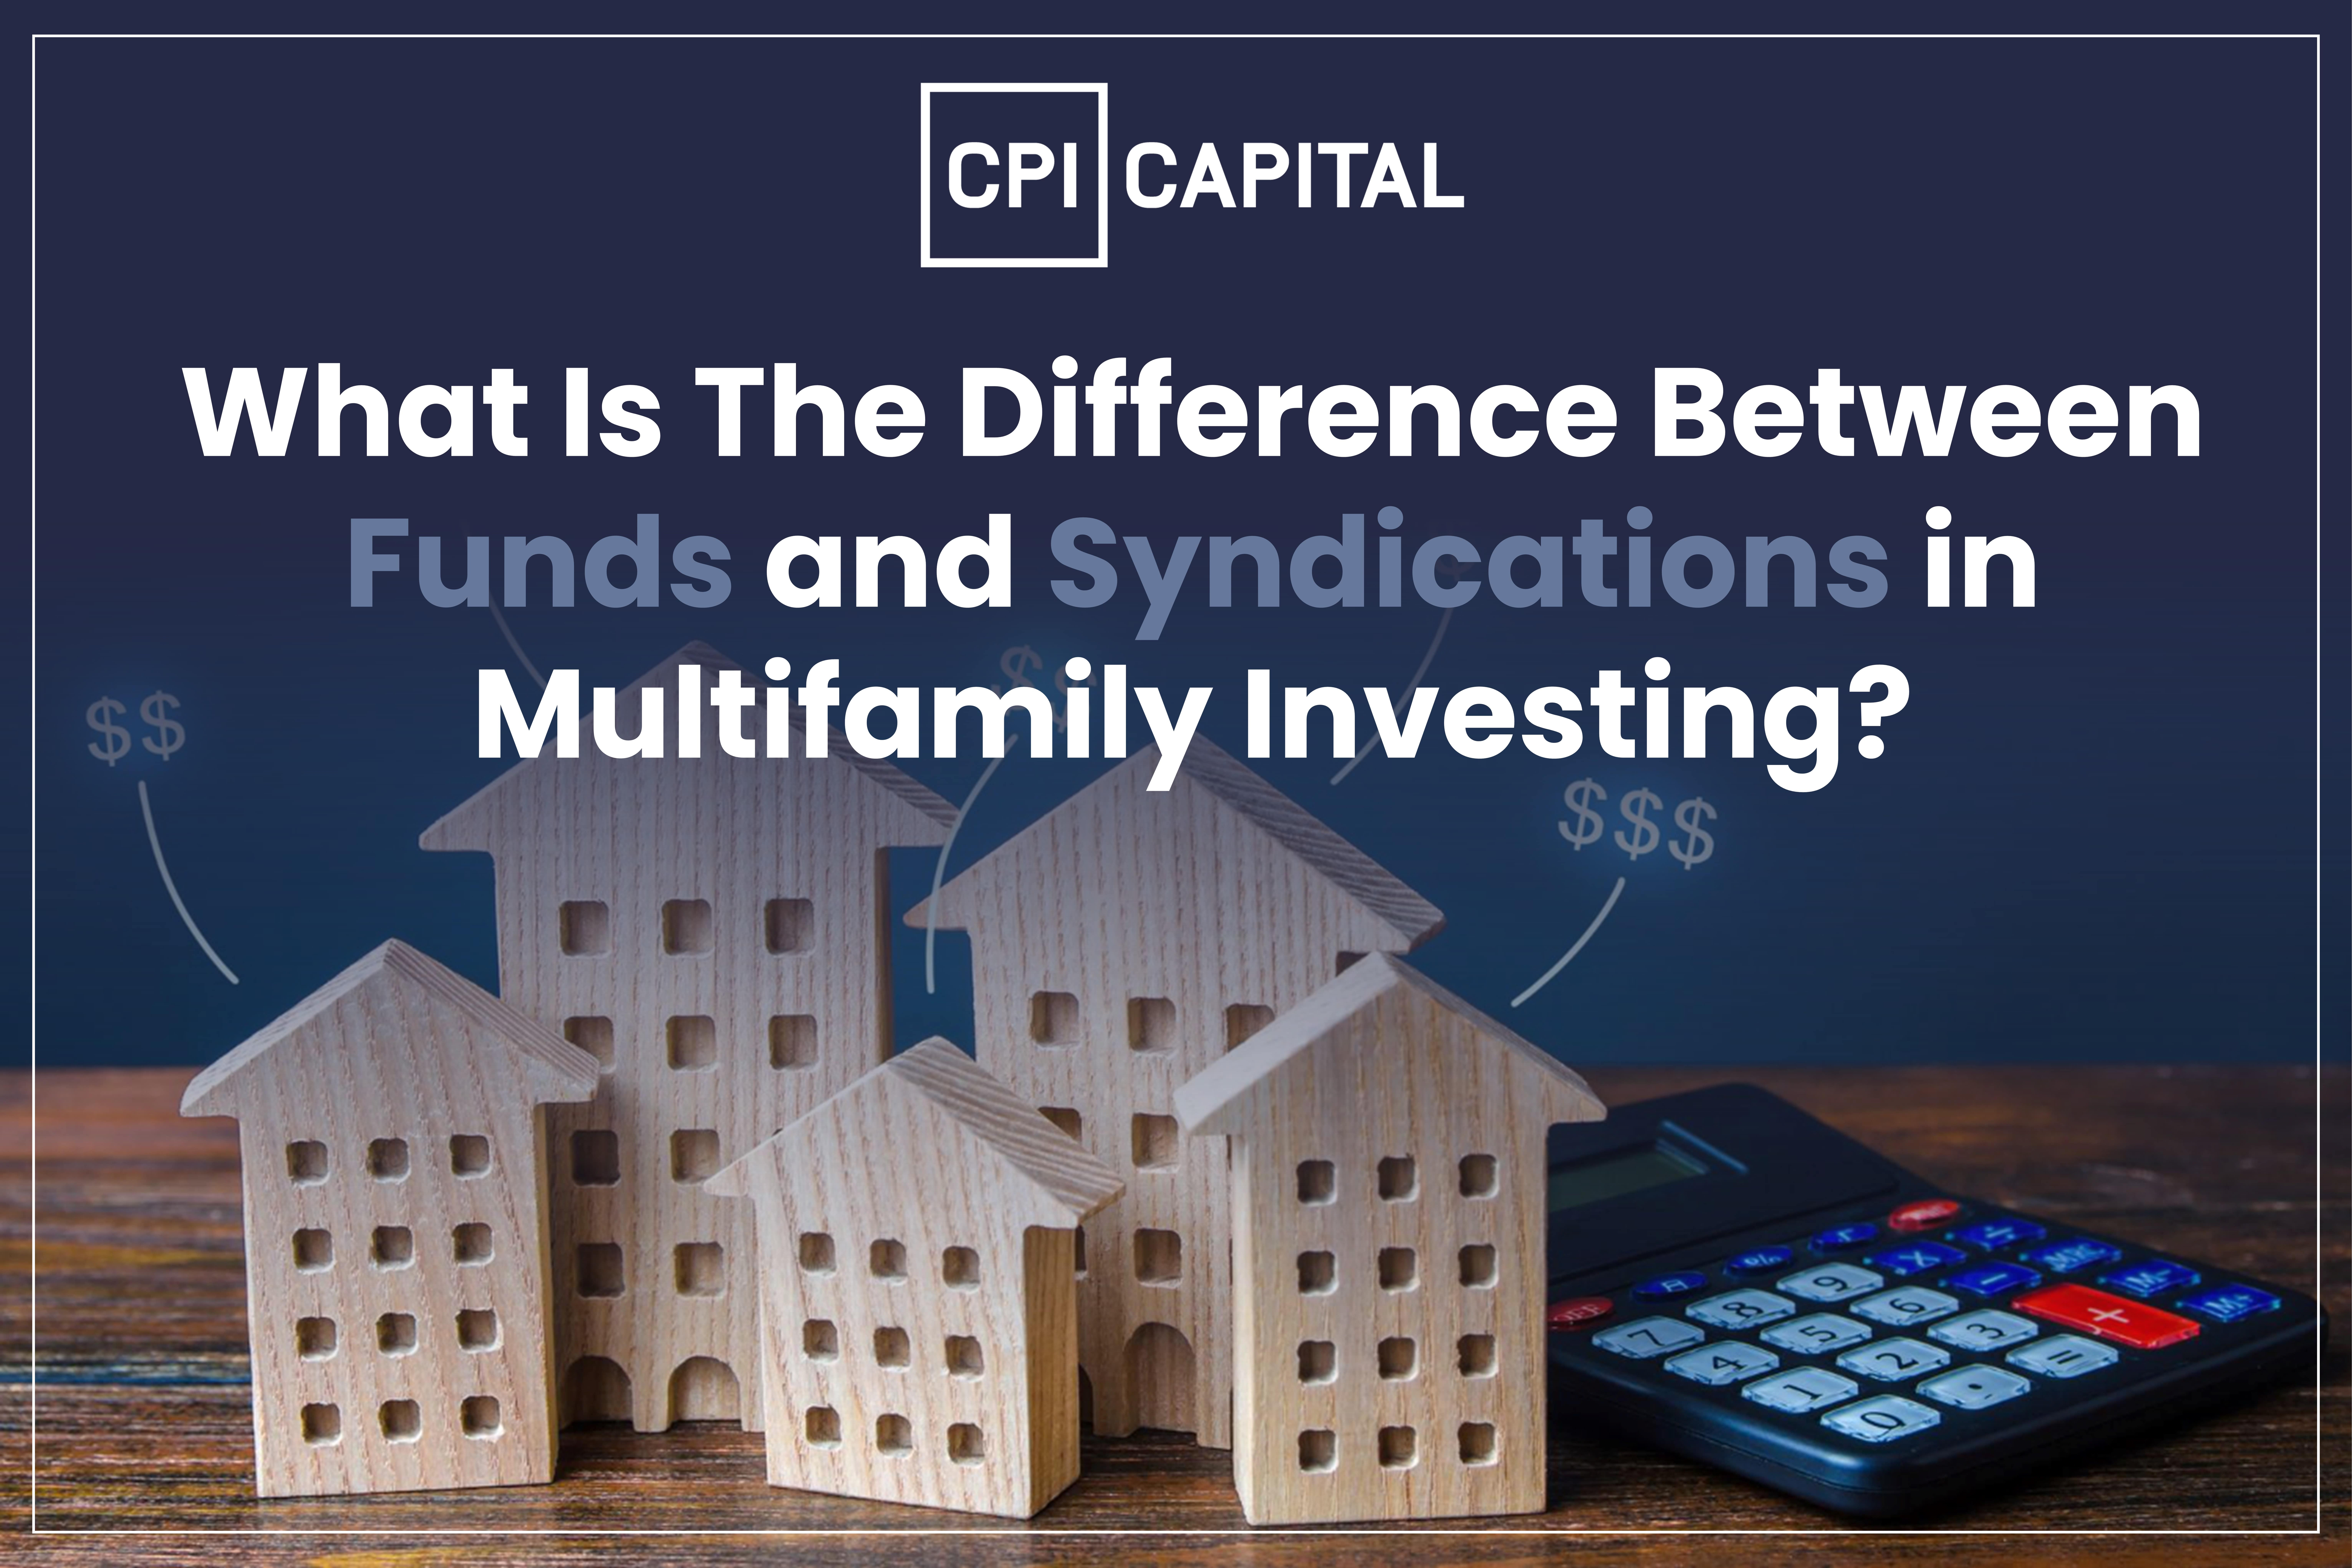 What Is The Difference Between Funds and Syndications in Multifamily Investing?